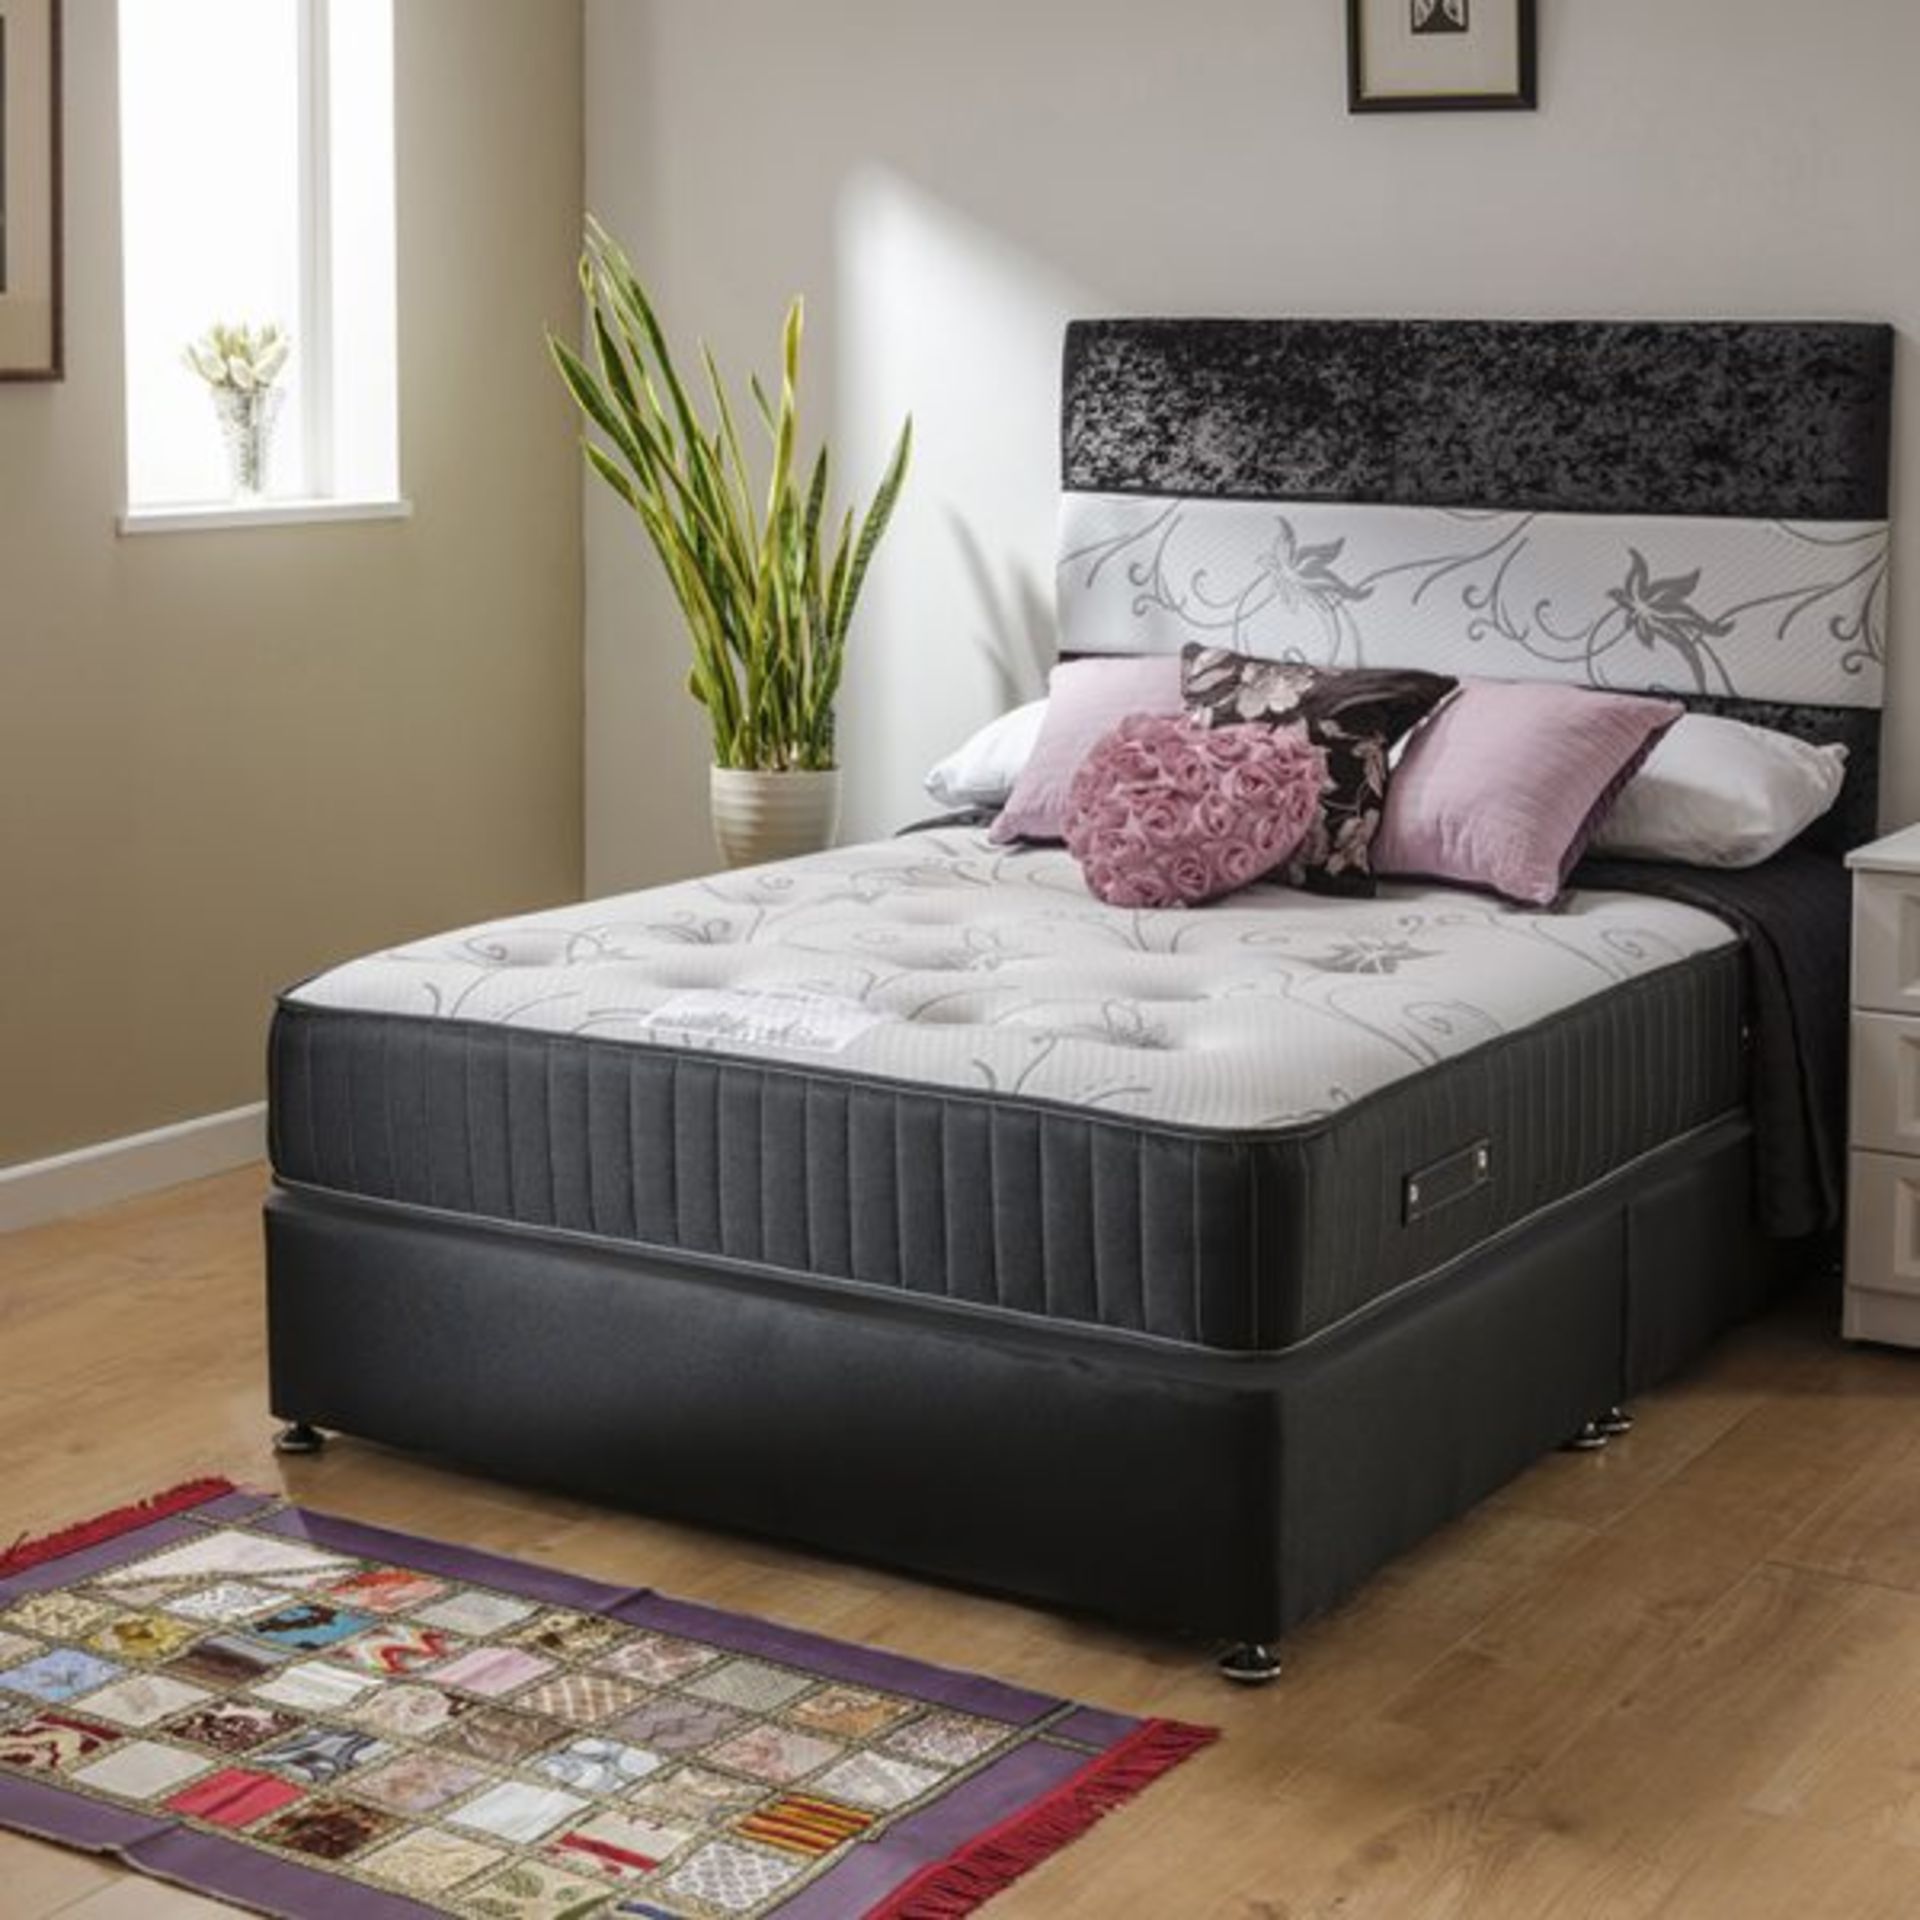 Brand new 4,6 double chelsea pocket memory divan bed and mattress in black glitz